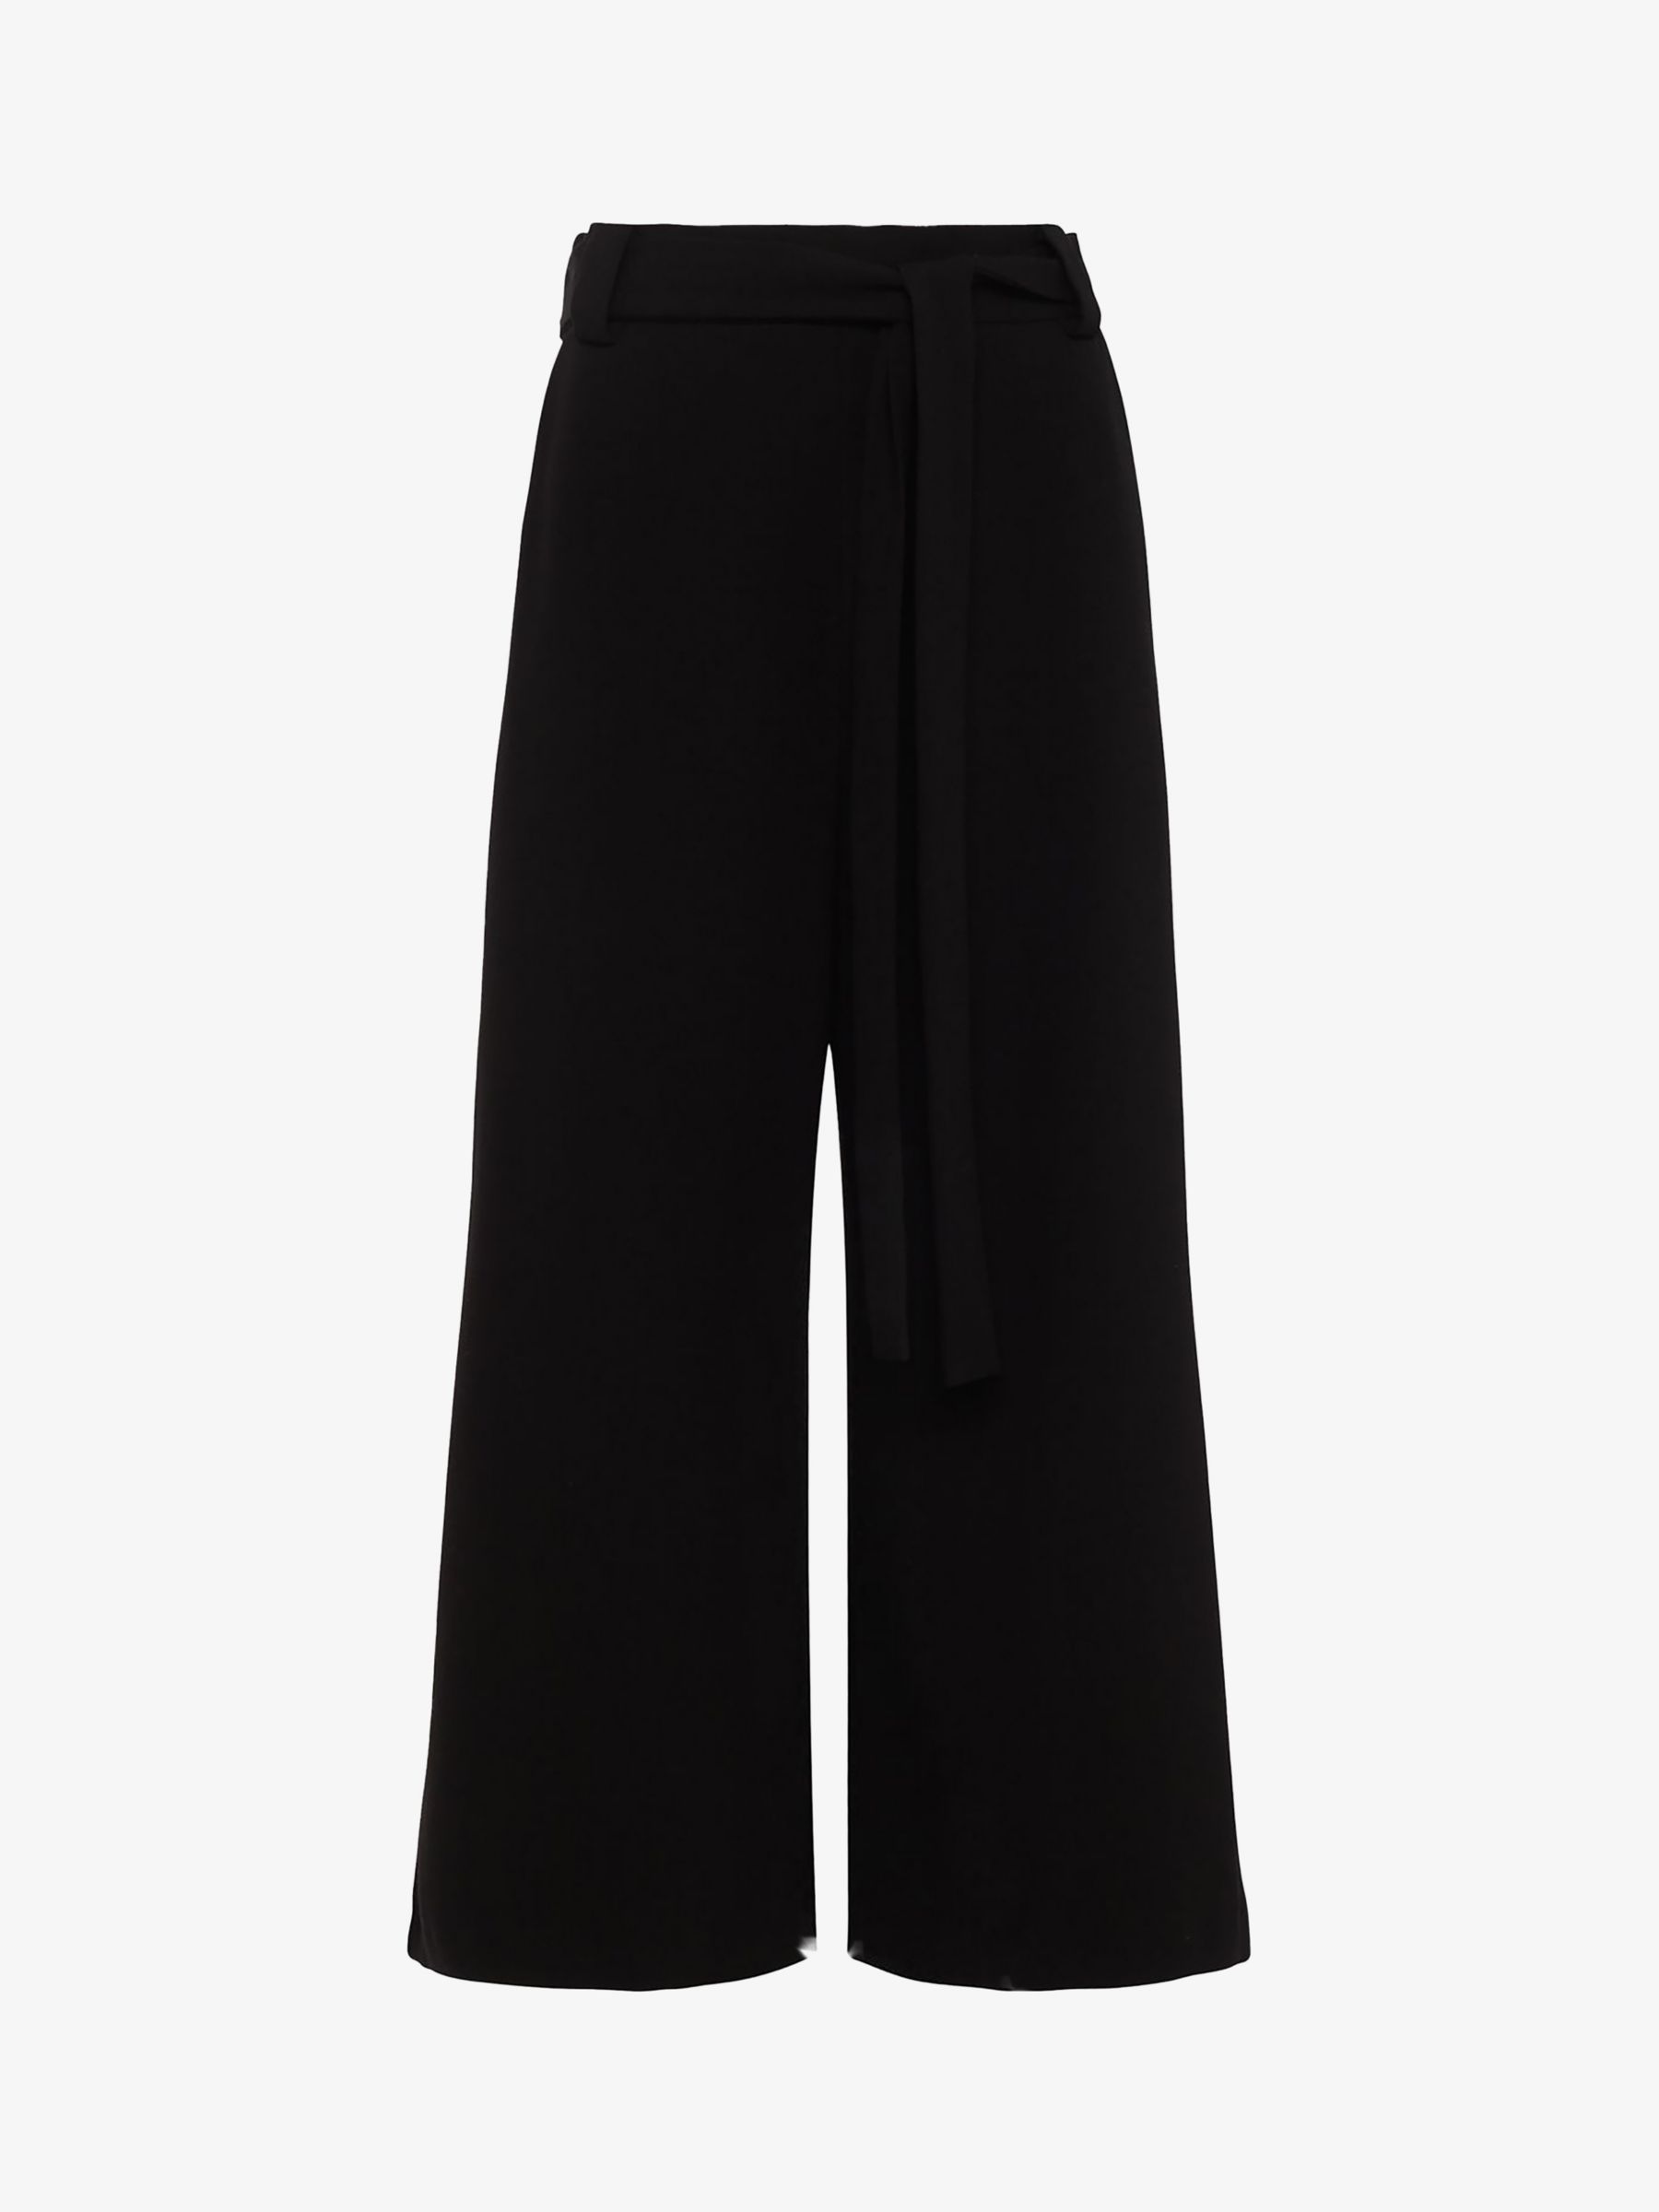 French Connection Whisper Belted Culottes, Black at John Lewis & Partners